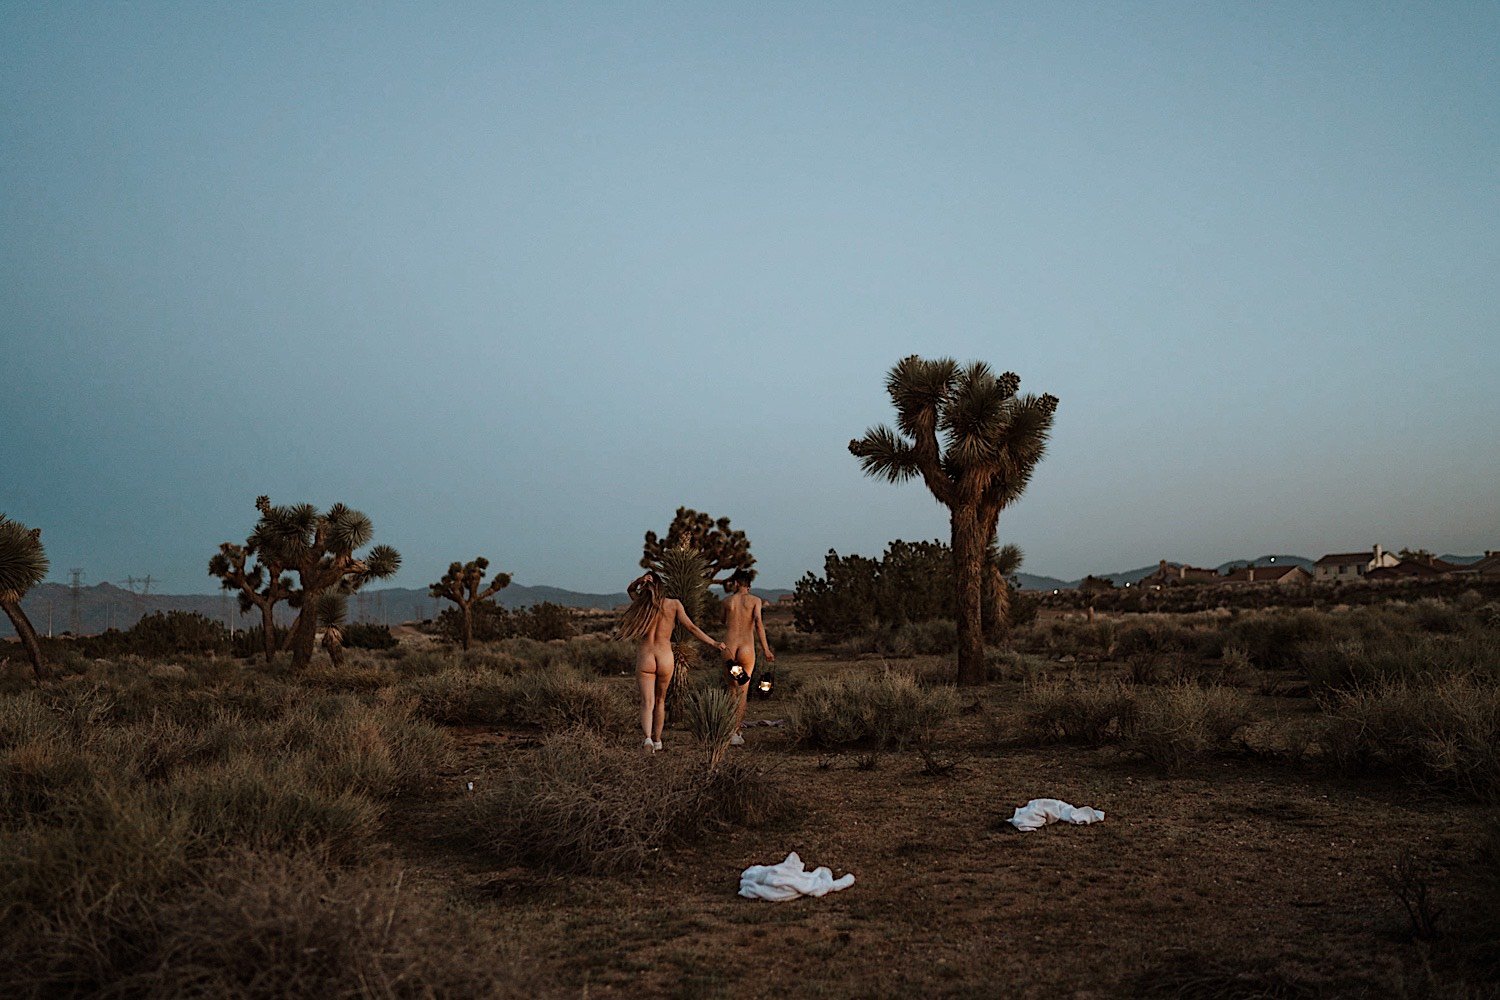 Naked couple walk away from the camera holding lanterns in the desert with Joshua trees around them